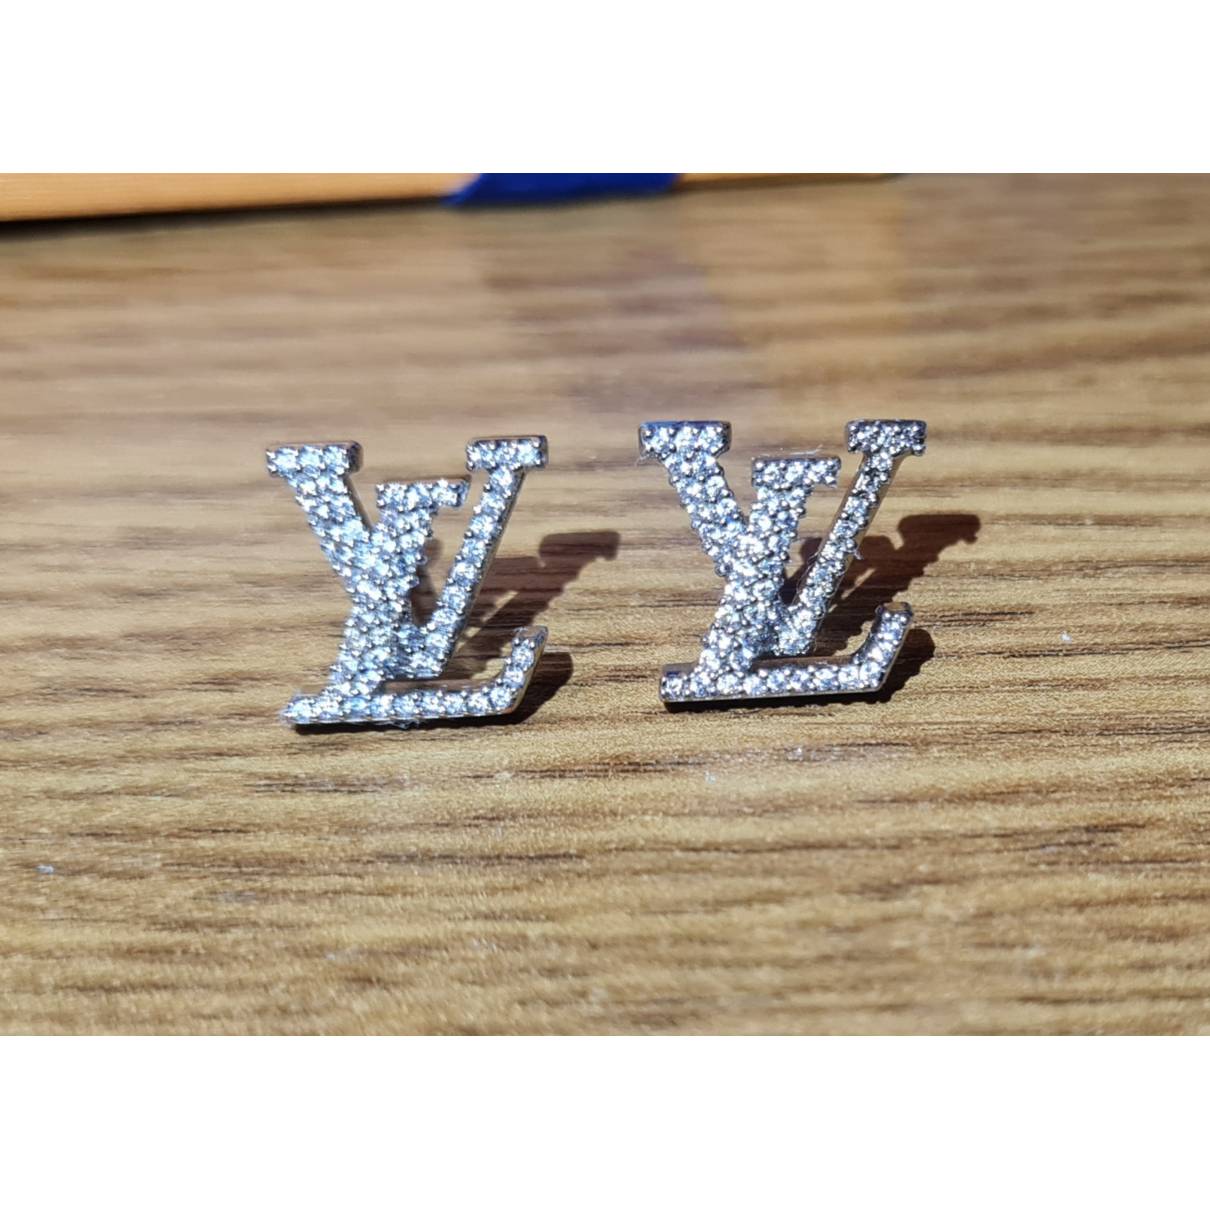 Lv iconic earrings Louis Vuitton Gold in Metal - 32042302